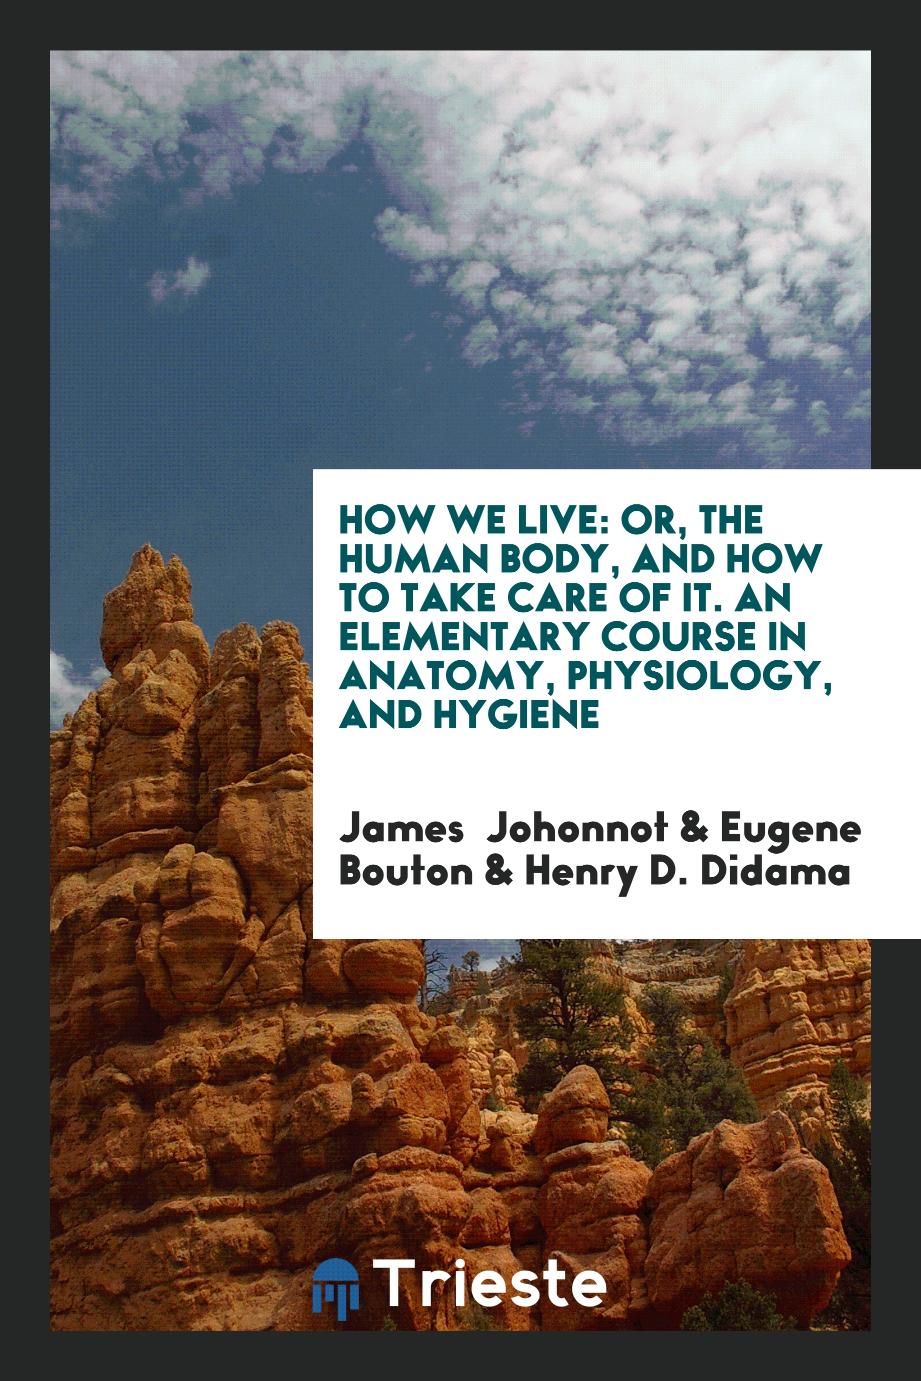 How We Live: Or, the Human Body, and How to Take Care of It. An Elementary Course in Anatomy, Physiology, and Hygiene